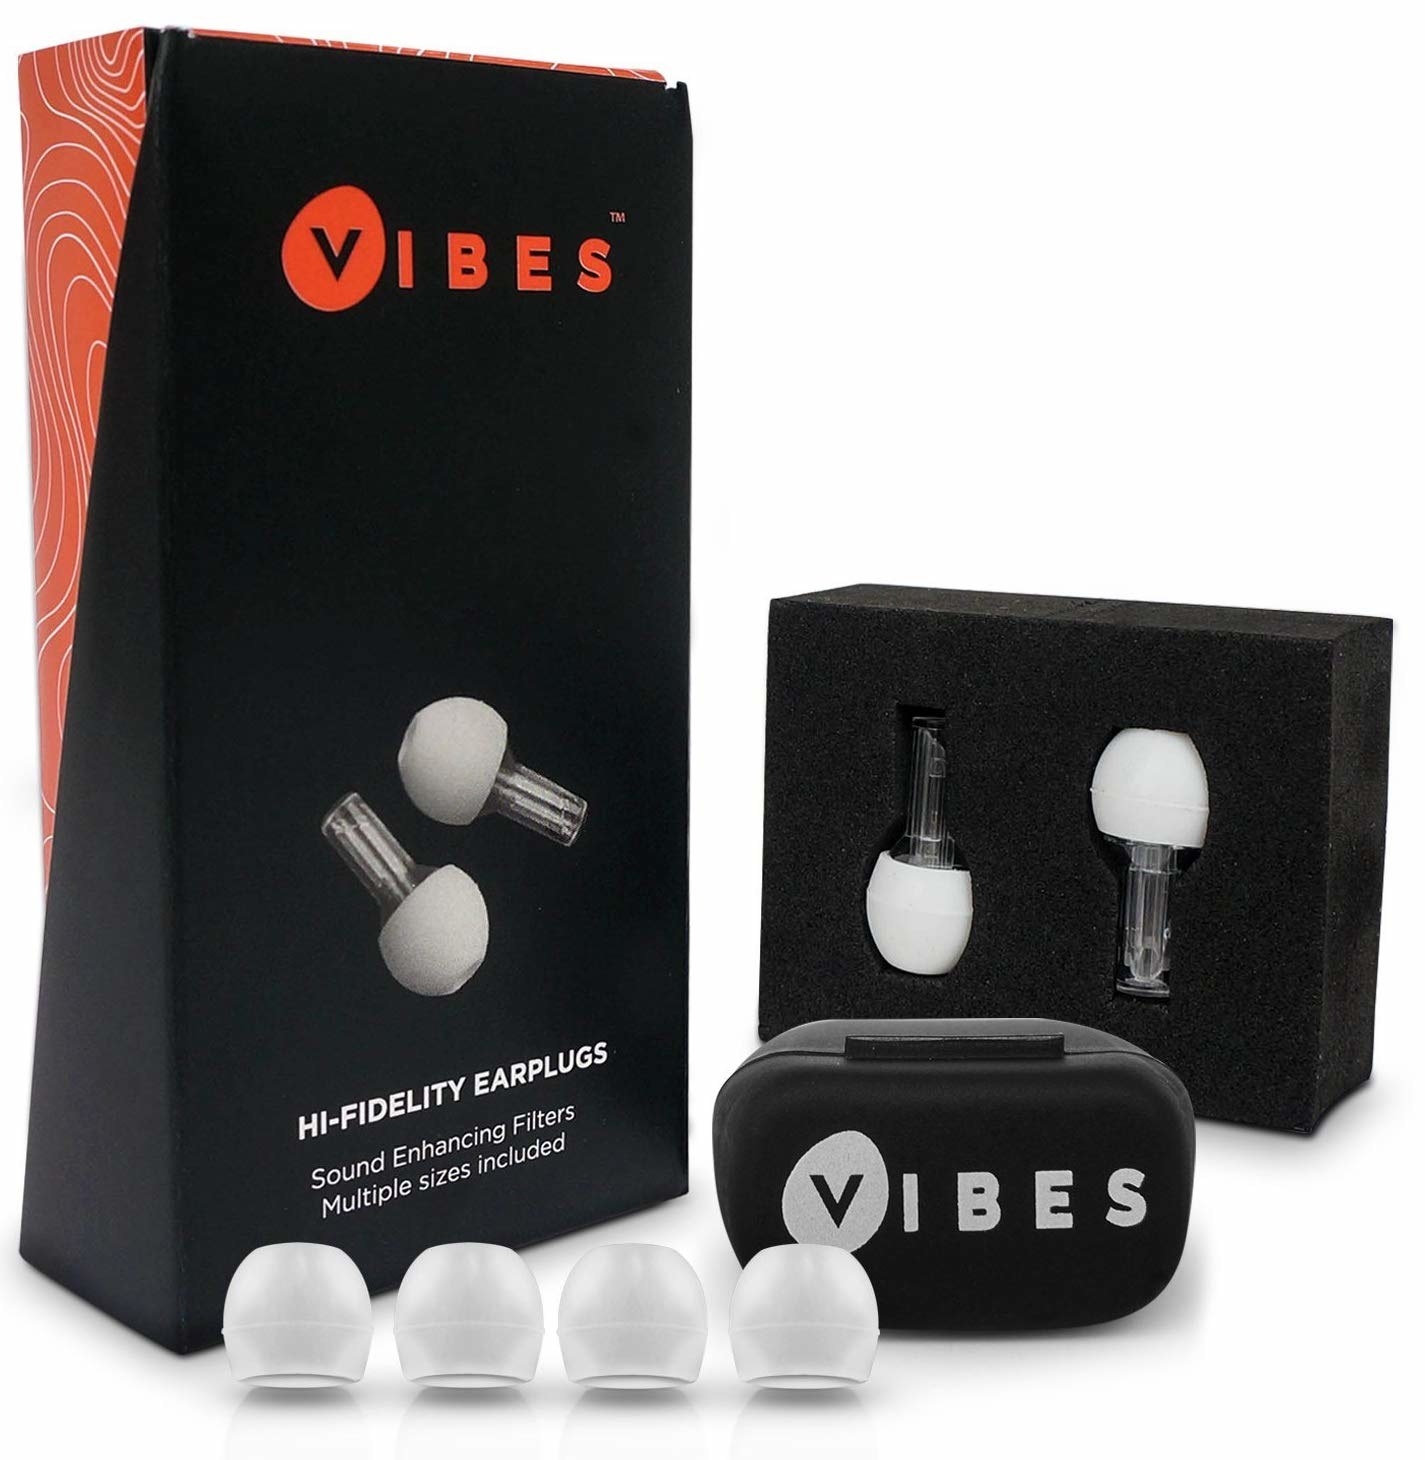 earplugs beside packaging and carrying case